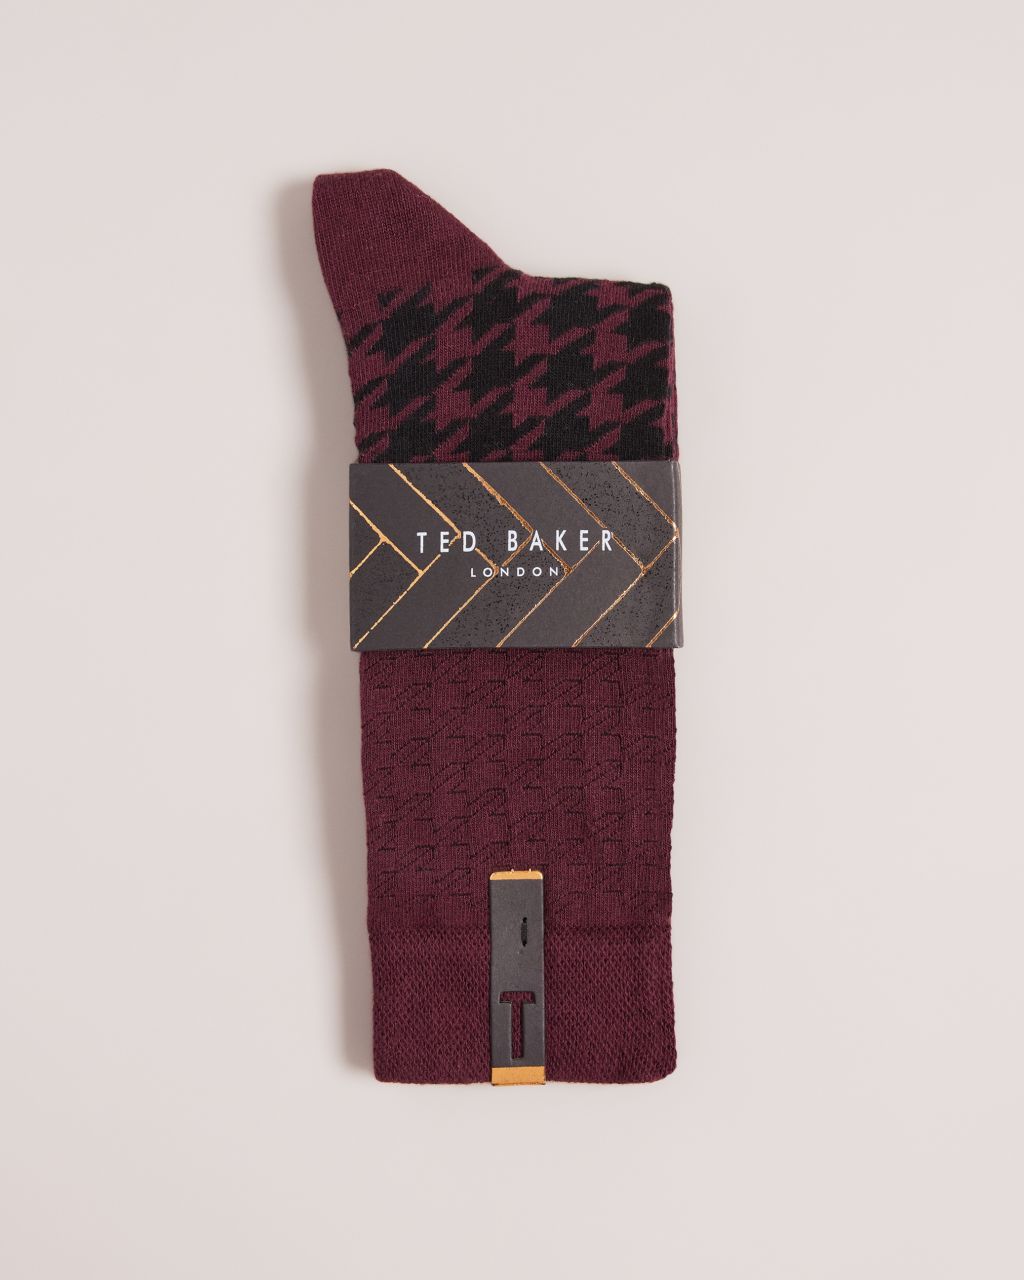 Ted Baker Men's Dog Tooth Pattern Socks in Dark Red, Patpats, Cotton